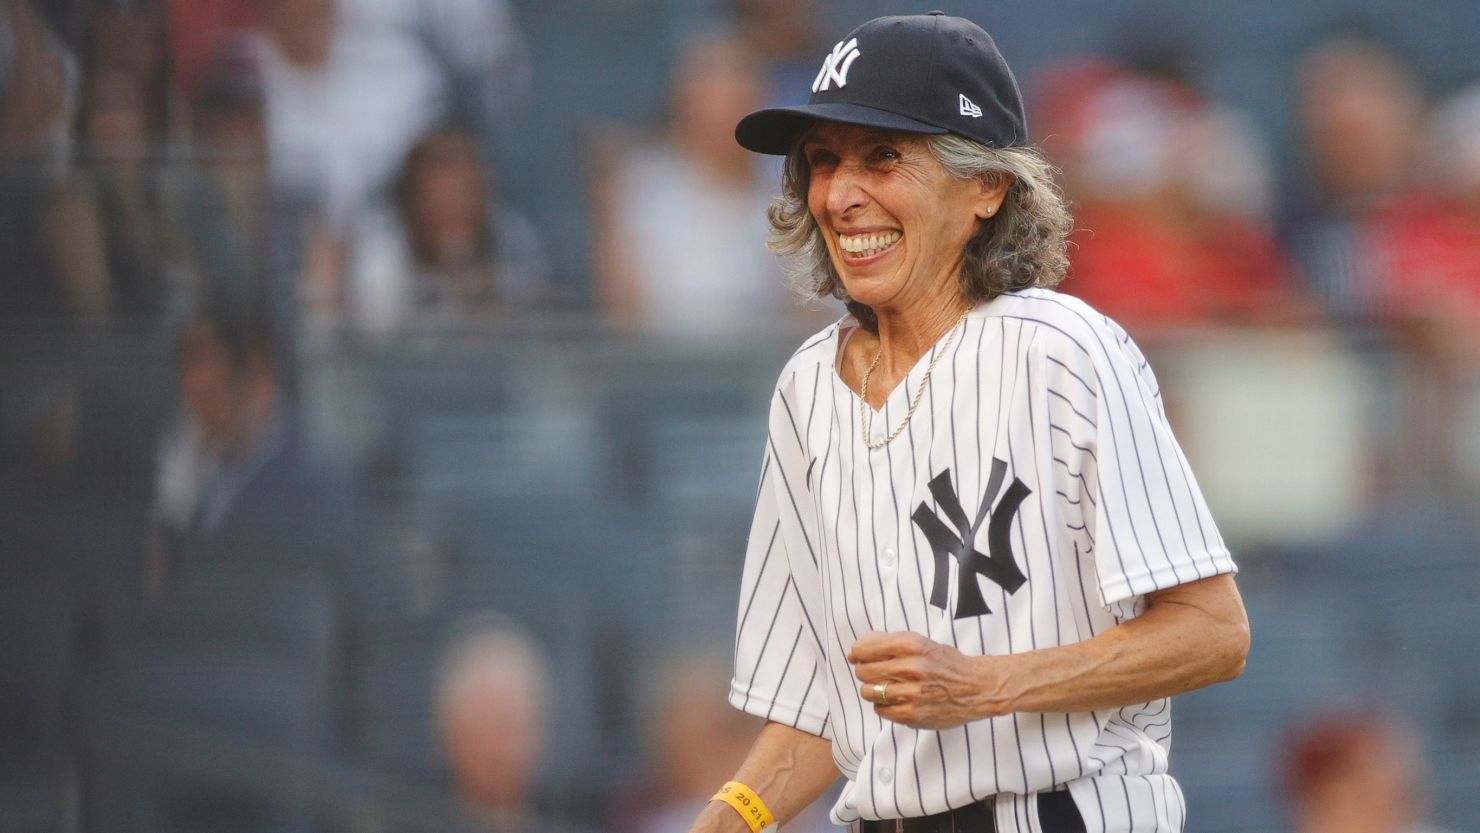 Gwen Goldman, 70, was an honorary bat girl for the Yankees on Monday, 60 years after she had been turned down by the team. 